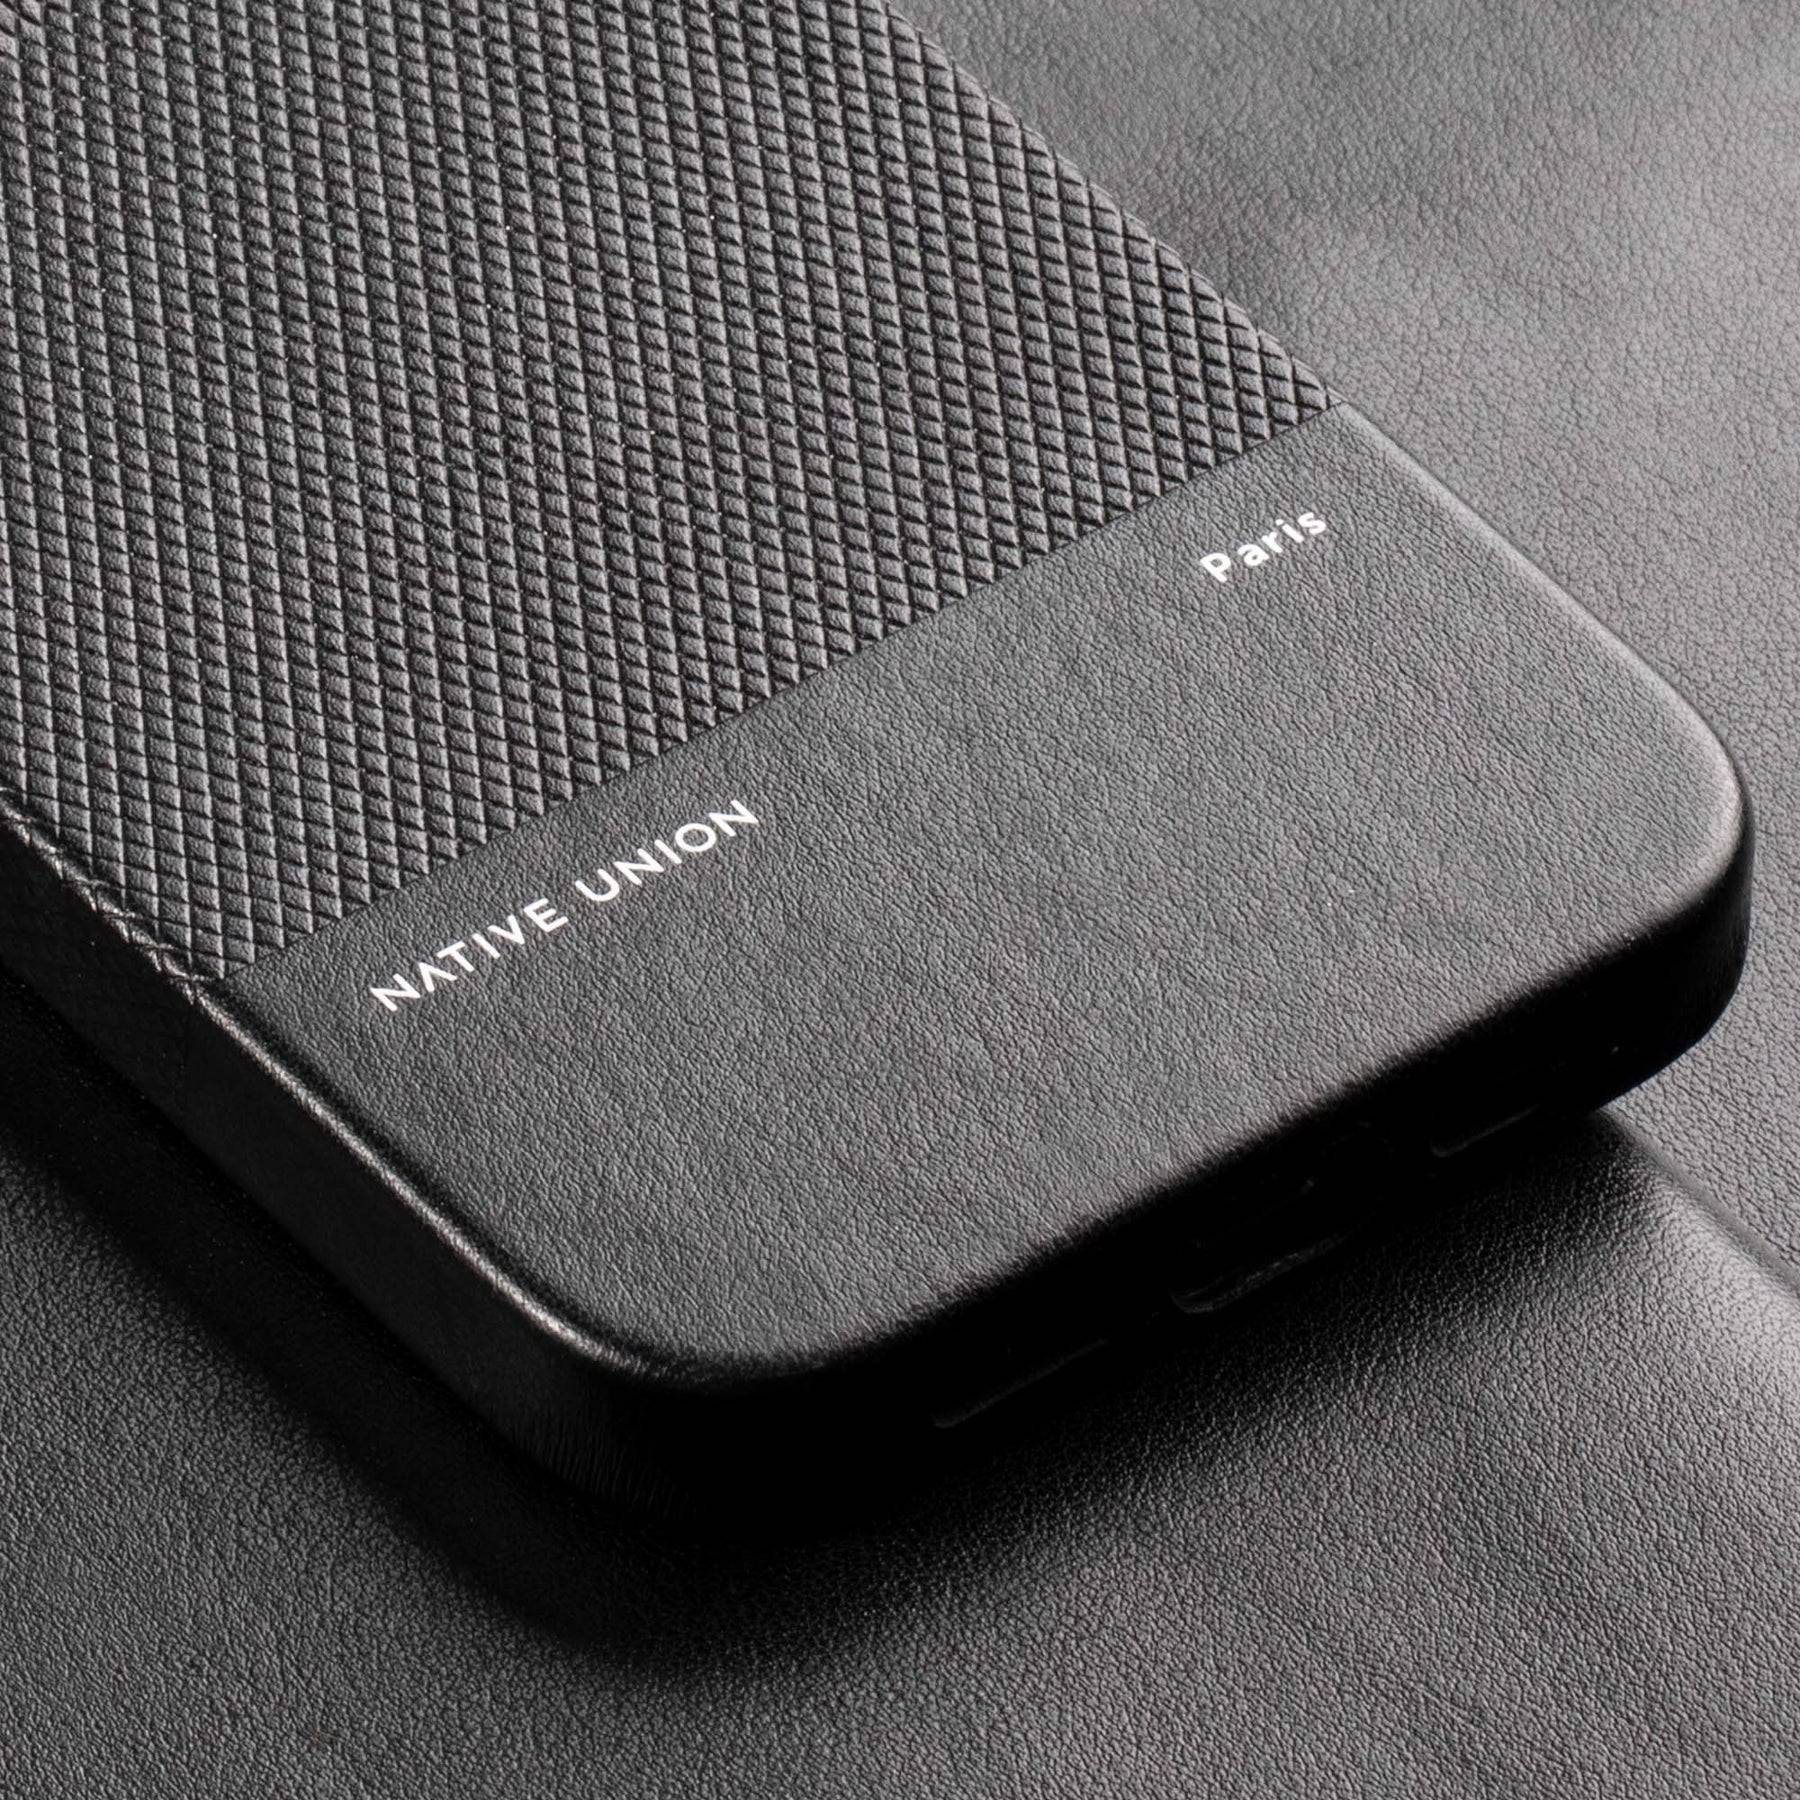 Native Union's iPhone 14 case comes with a leather build and a companion MagSafe  Wallet - Yanko Design